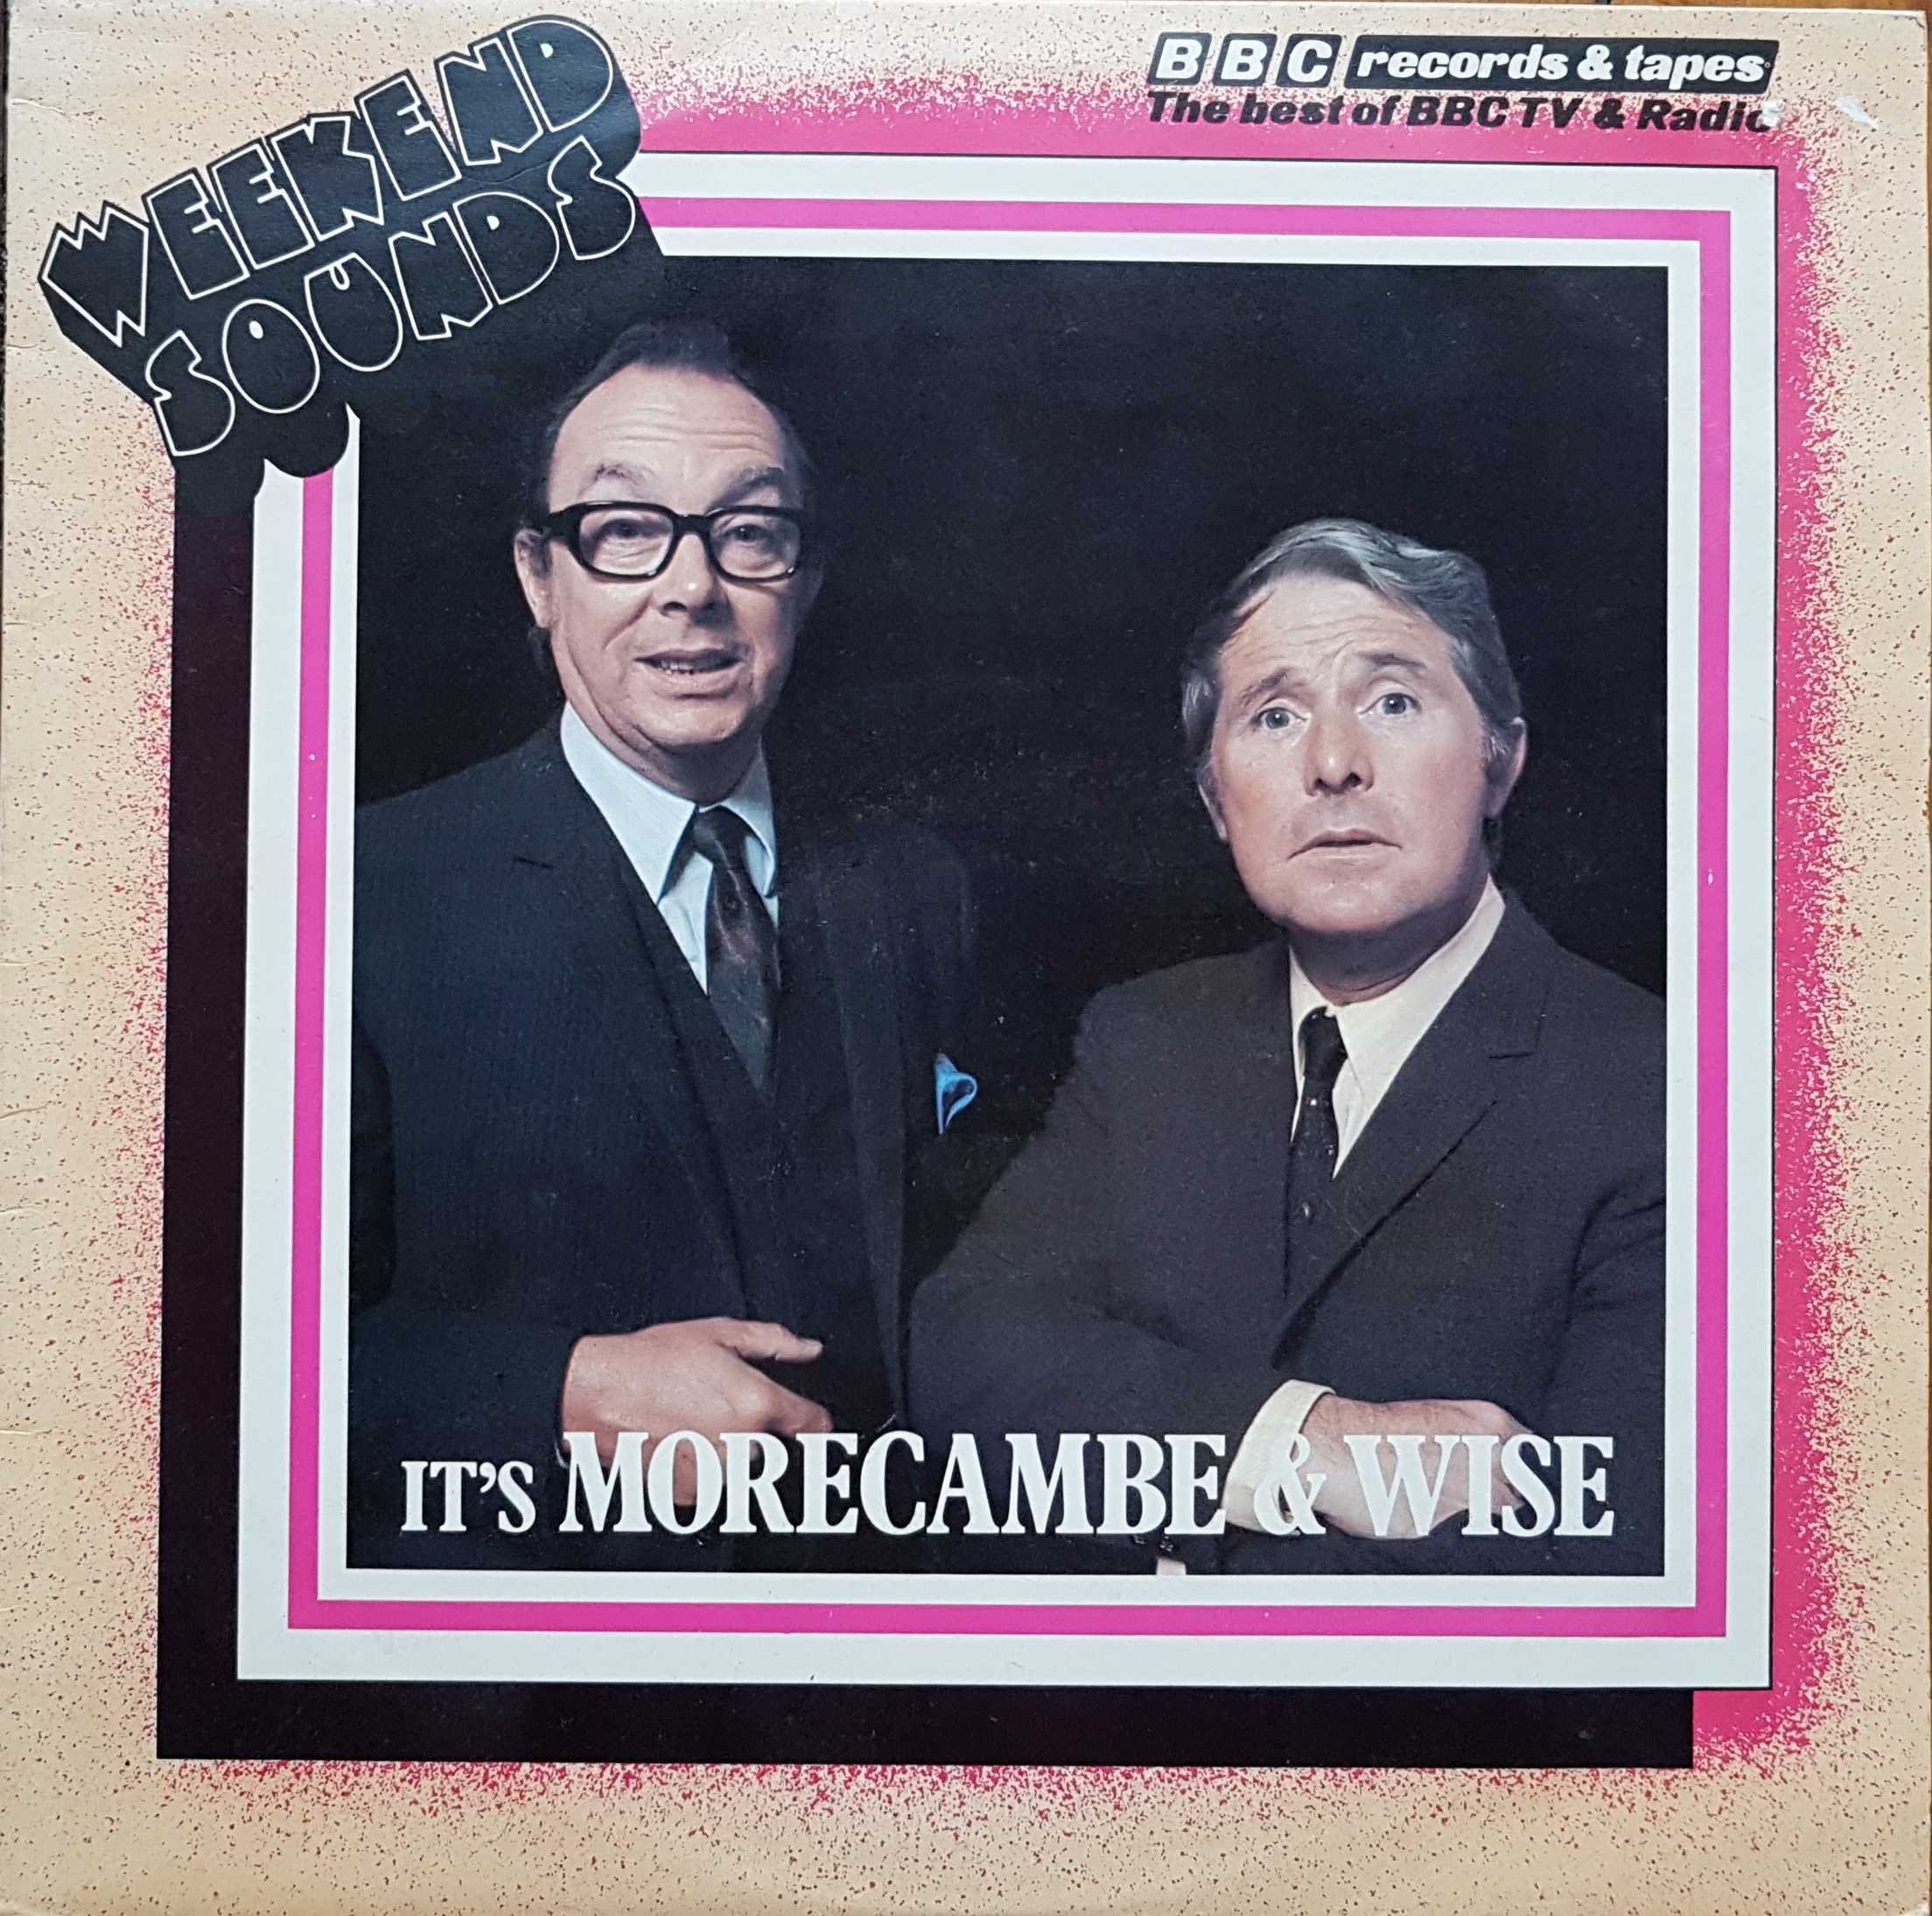 Picture of REC 258 Its Morecambe & Wise by artist Morecambe / Wise from the BBC albums - Records and Tapes library